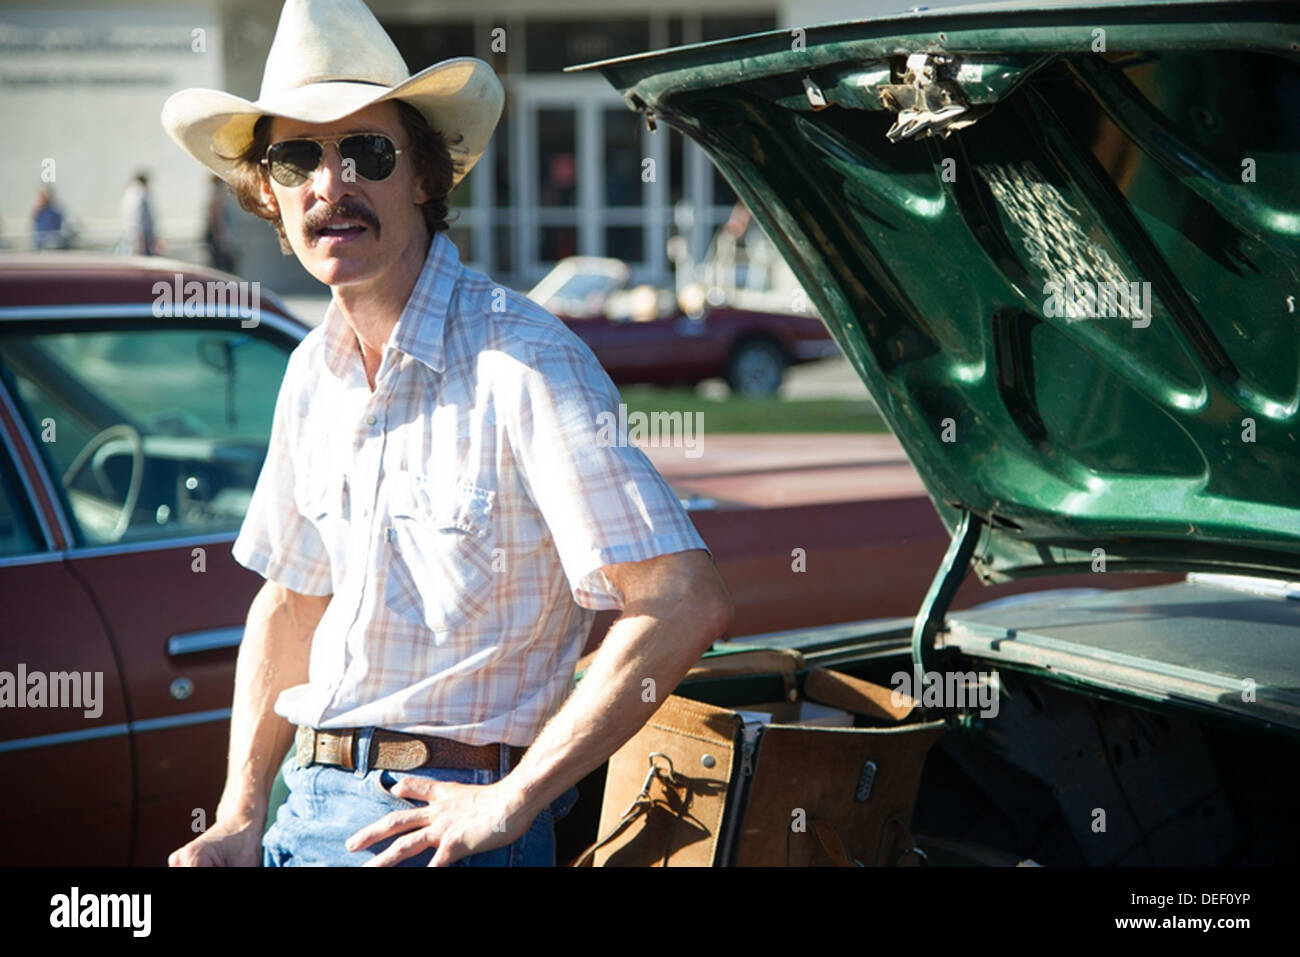 DALLAS BUYERS CLUB 2013 Focus Features film with Matthew McConaughey Stock Photo